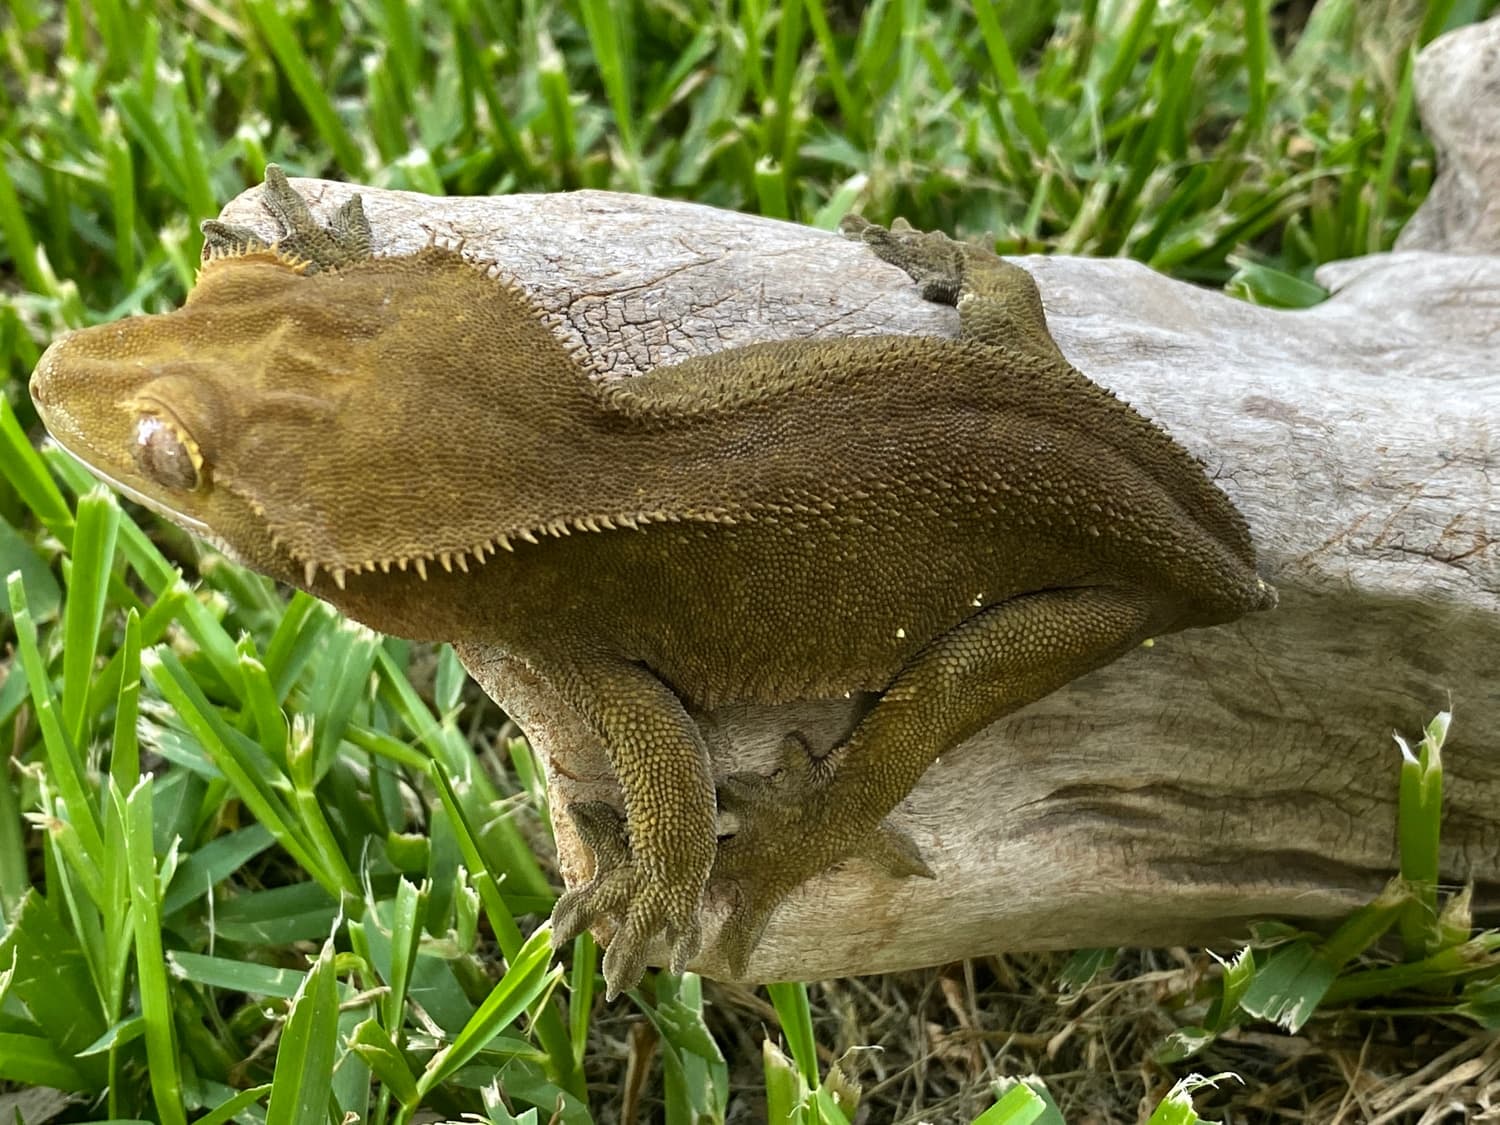 PROVEN Dark Olive Female Crested Gecko by Cool, Calm, and Crested